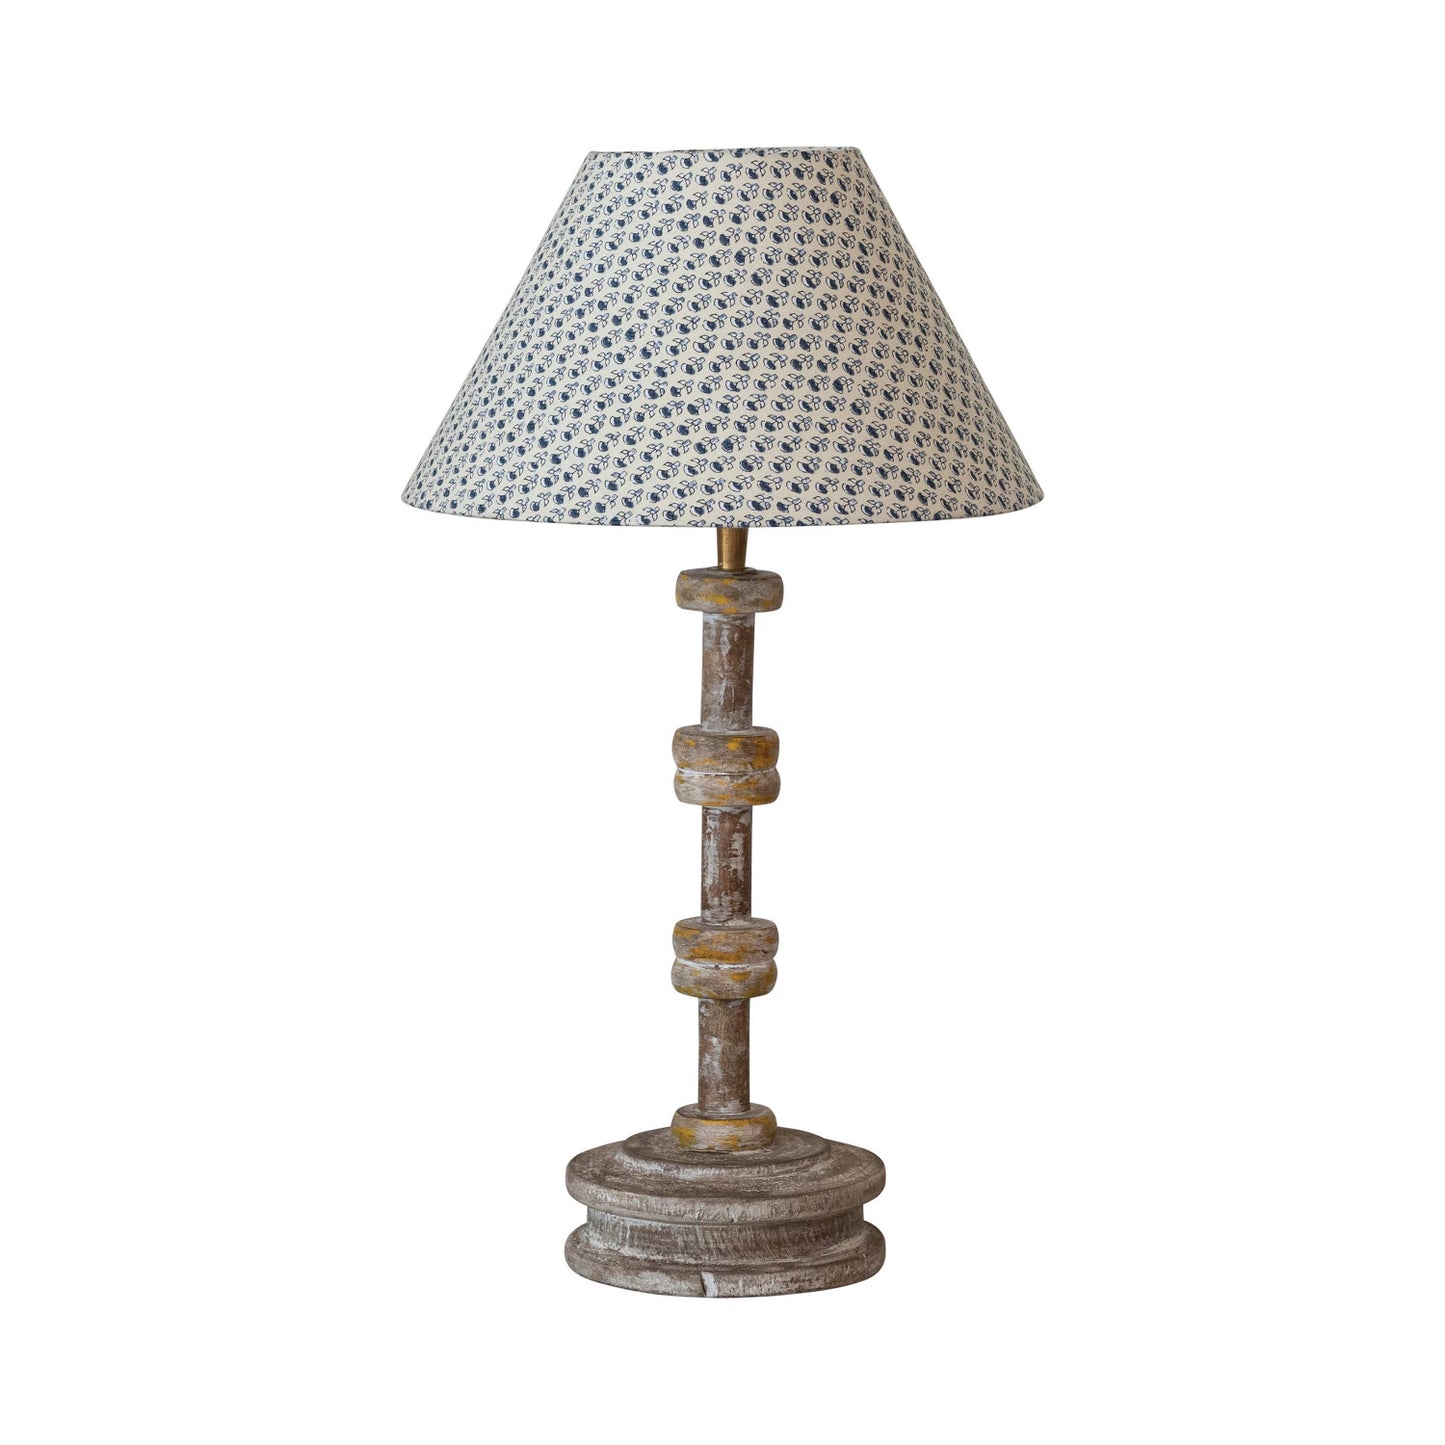 Wood Spool Table Lamp with Blue Patterned Cotton Shade - Antique Collection - #8983